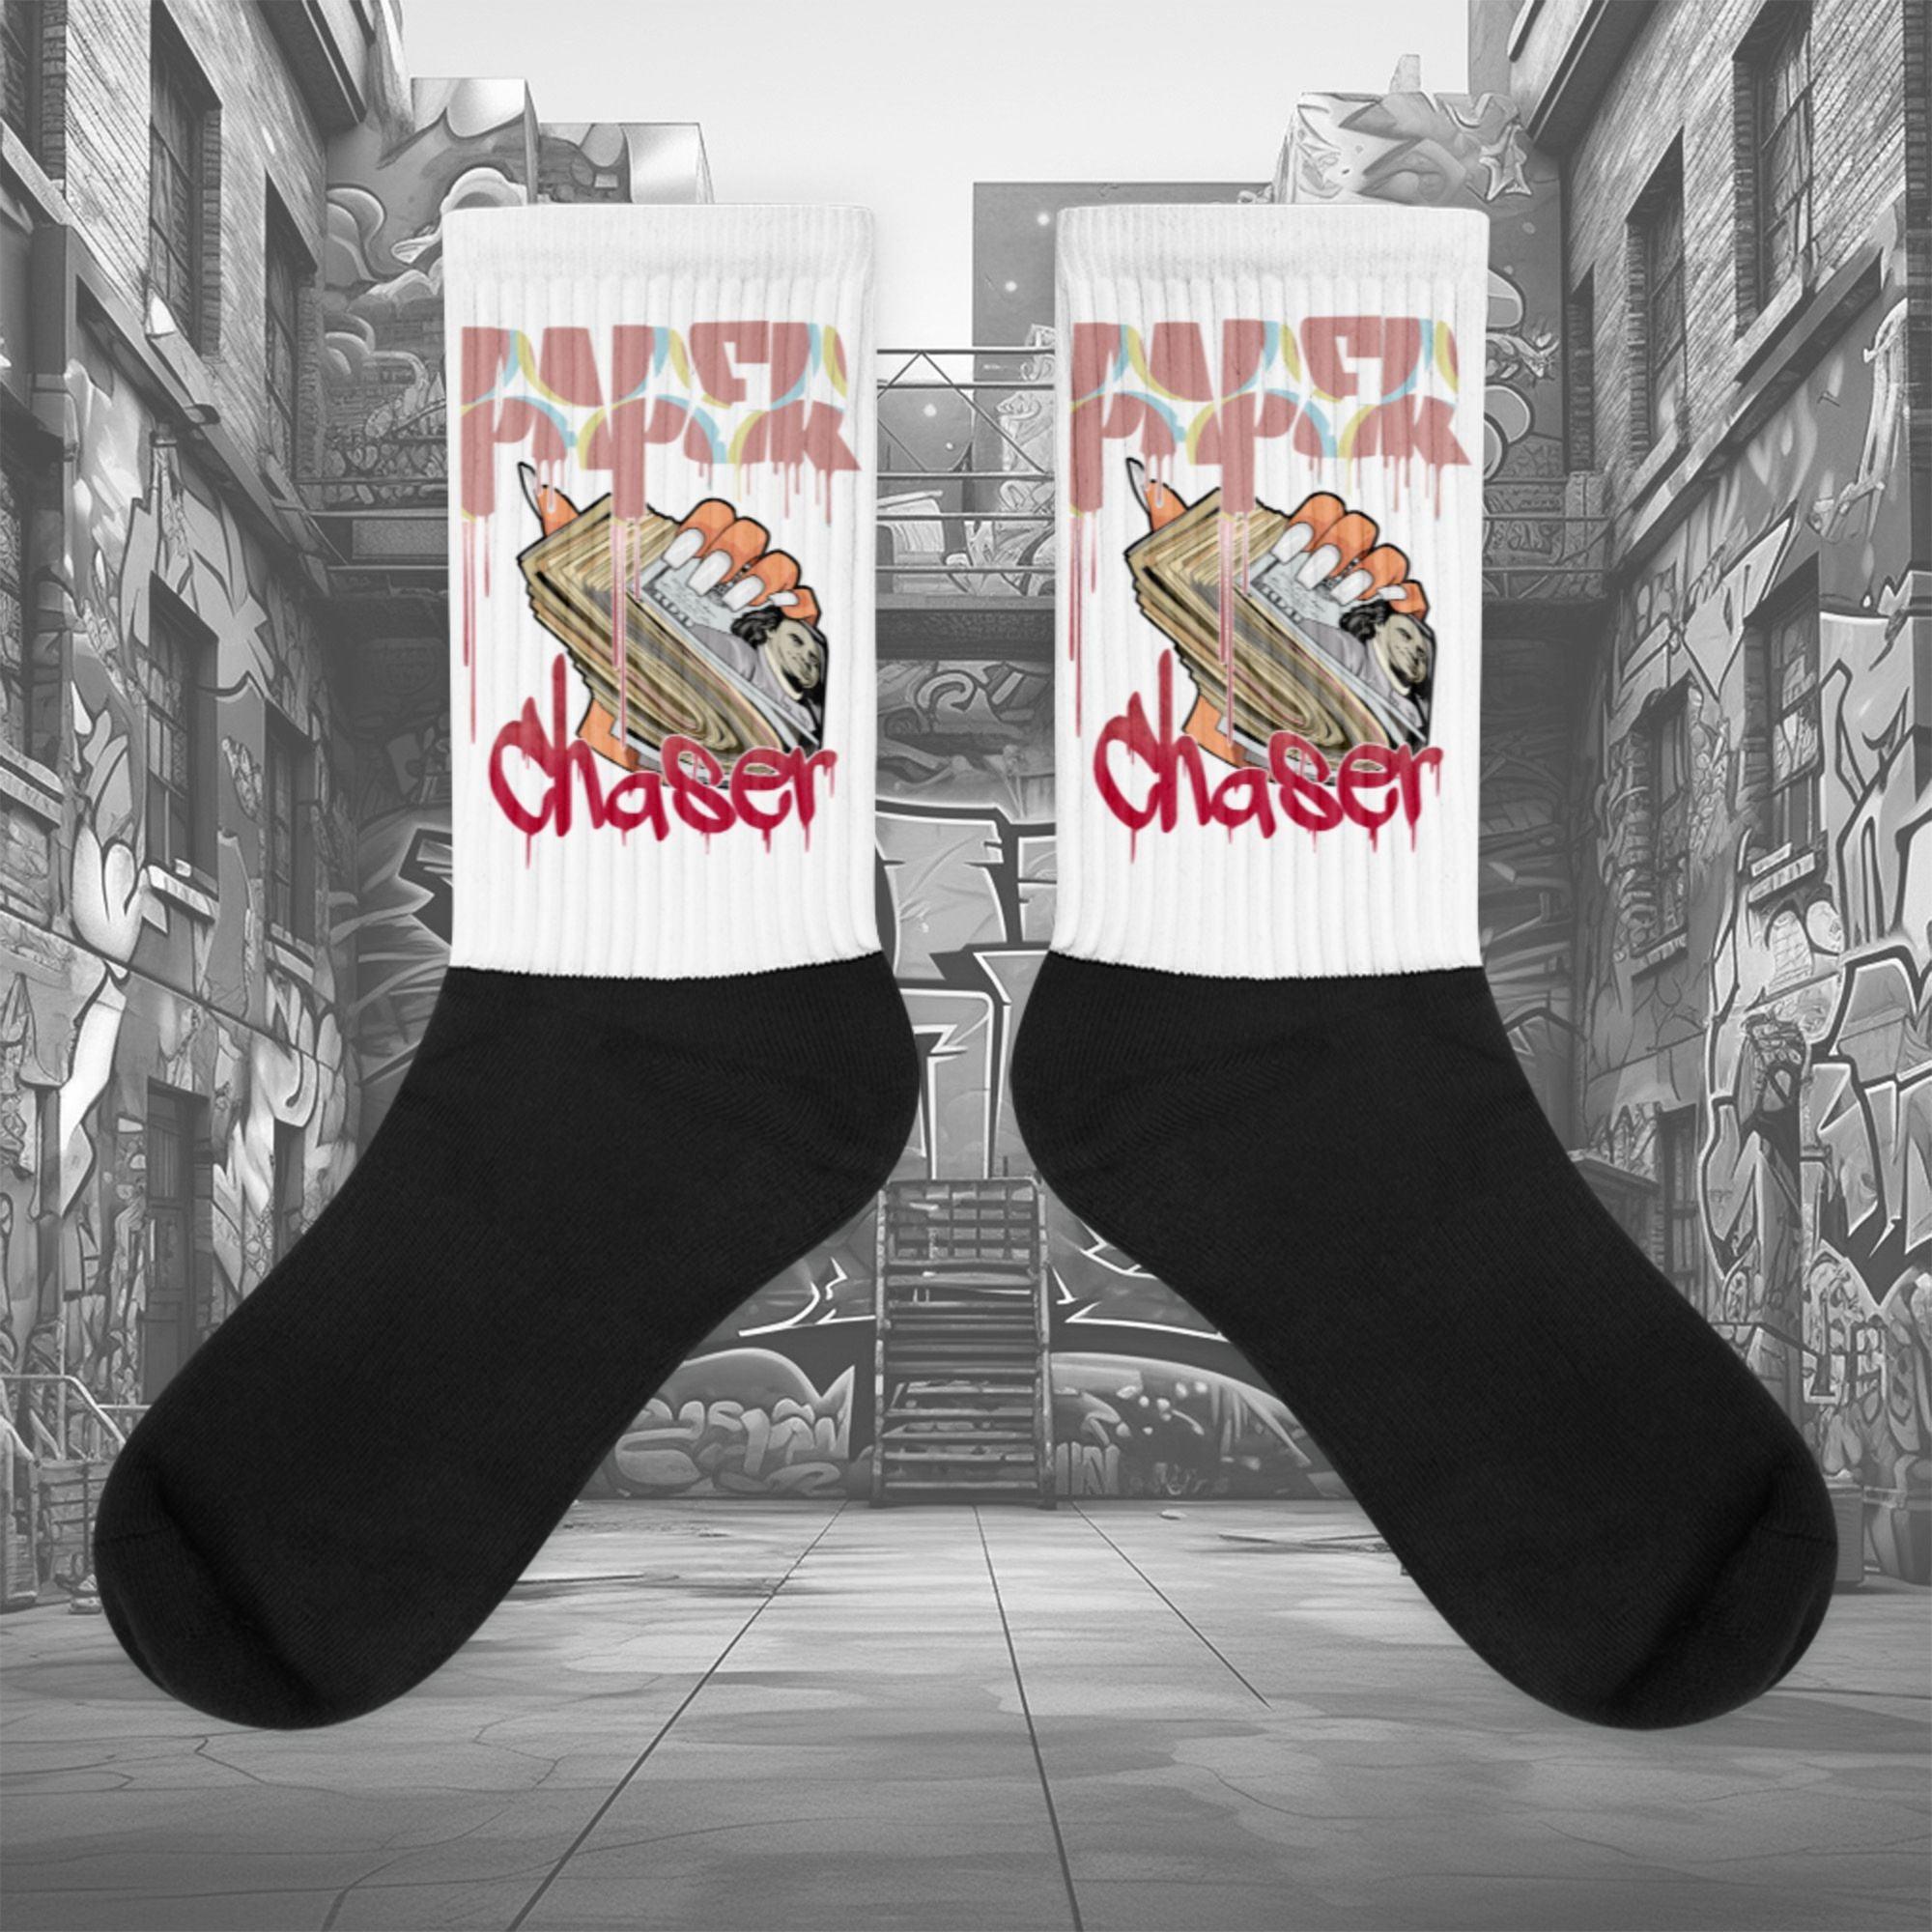  Showcases the view of the socks, highlighting the vibrant ‘Paper Chaser’ design, which perfectly complements the Air Jordan 1 Retro High OG Next Chapter Spider-Verse sneakers. The intricate pattern and color scheme inspired by the Spider-Verse theme are prominently displayed.  Focusing on the ribbed leg , cusioned bottoms and the snug fit of the socks. This angle provides a clear view of the texture and quality of the material blend.